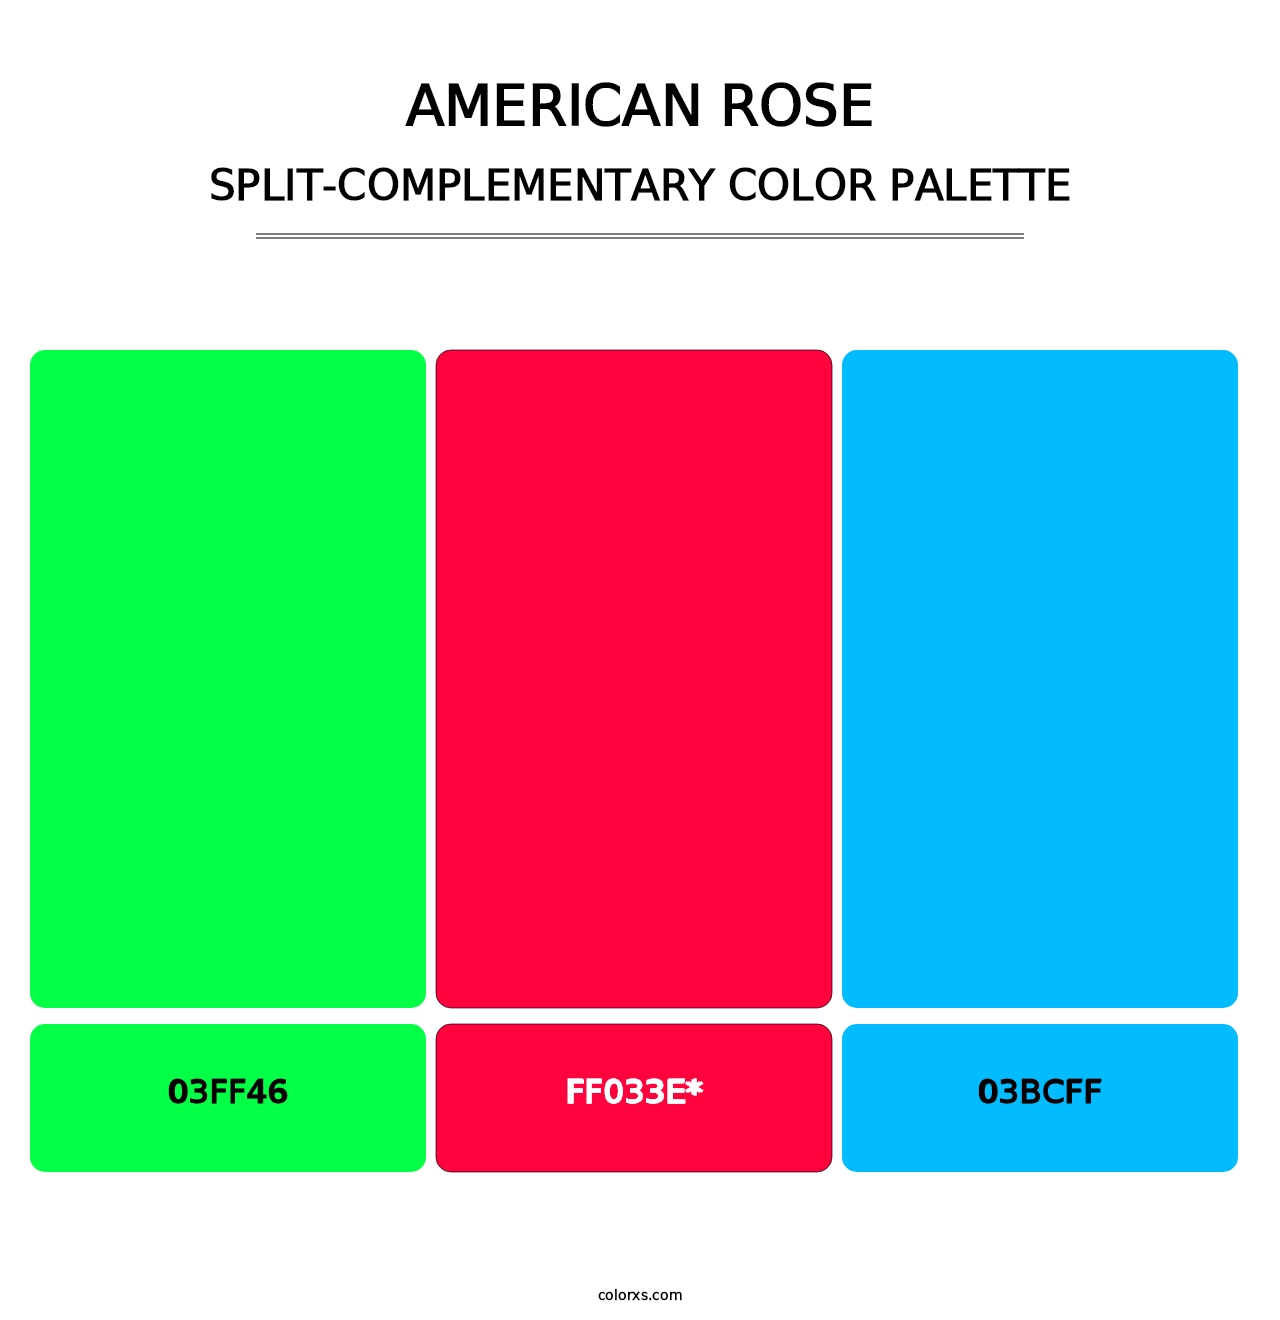 American Rose - Split-Complementary Color Palette